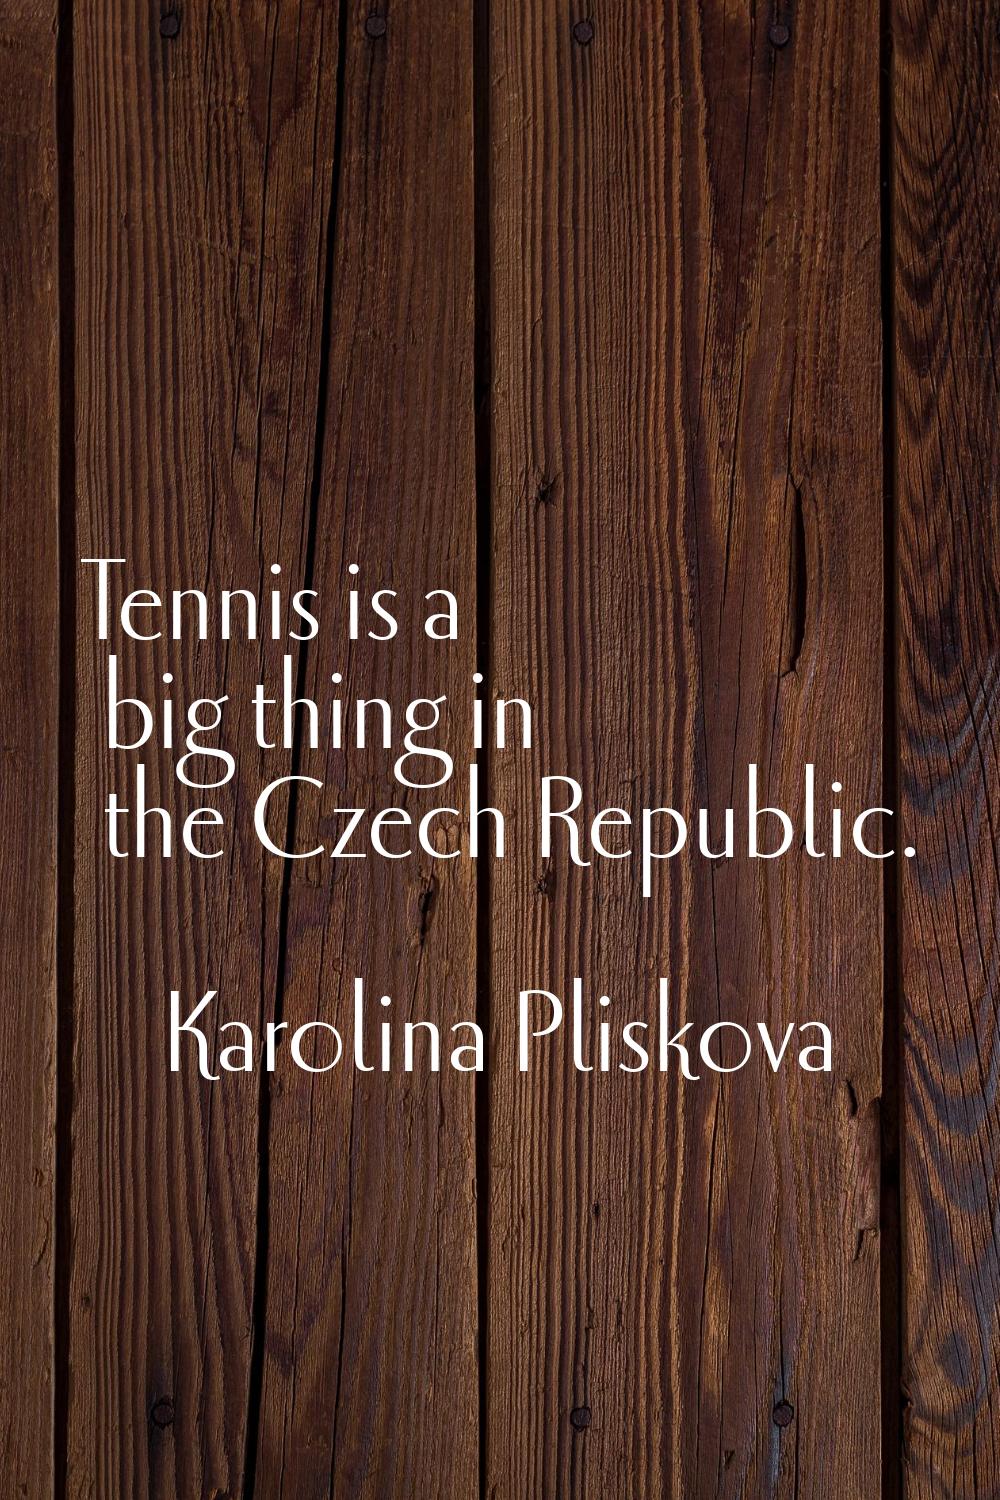 Tennis is a big thing in the Czech Republic.